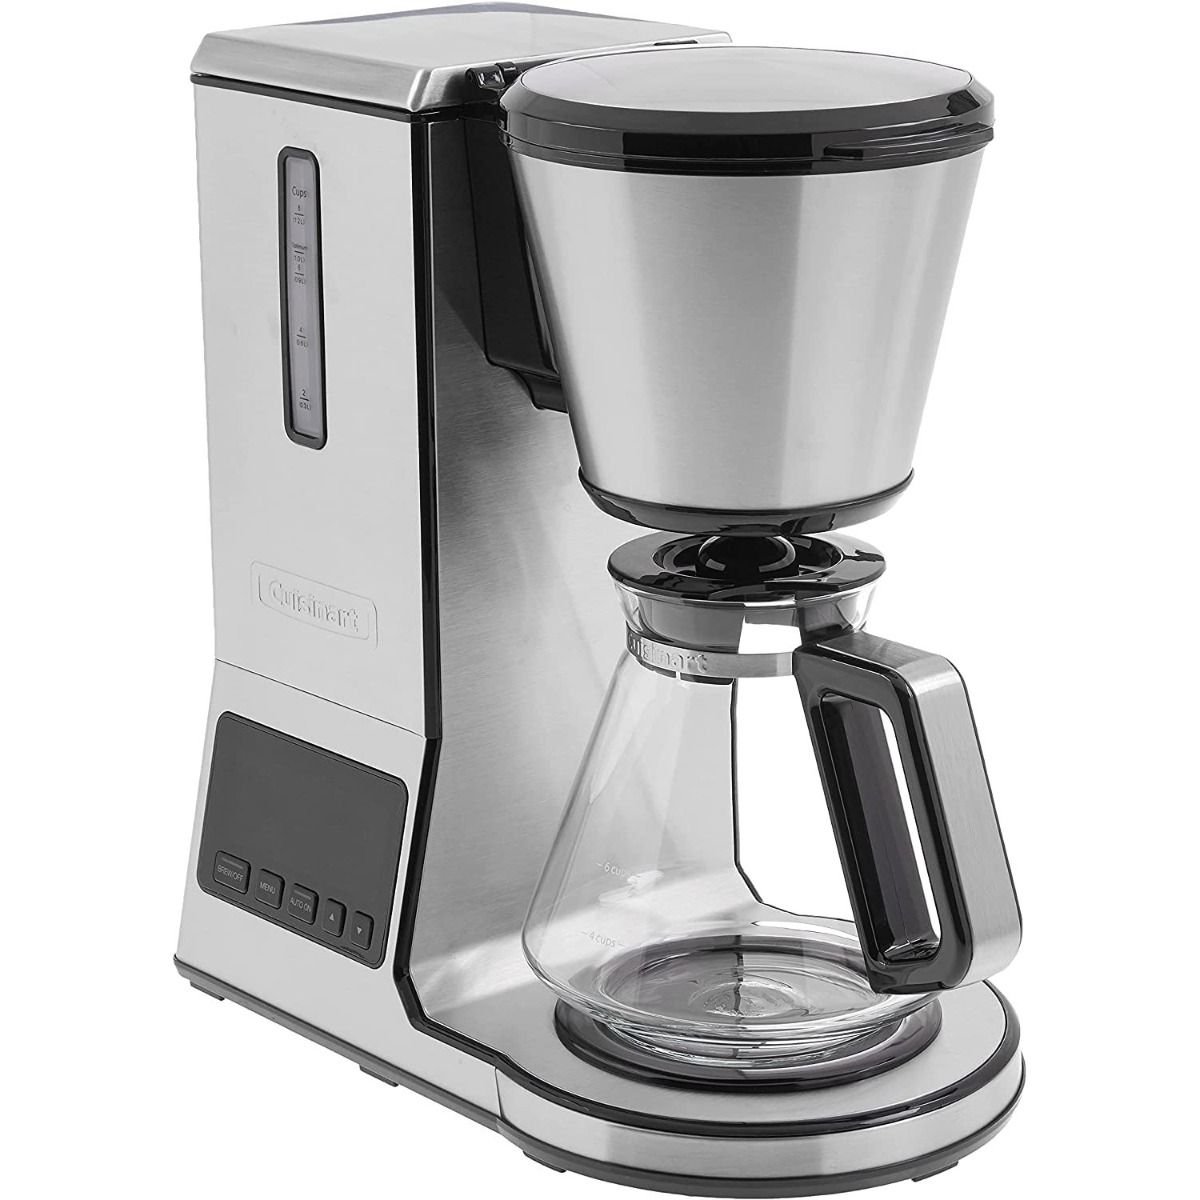  Cuisinart 4 Cup w/Stainless-Steel Carafe Coffeemaker